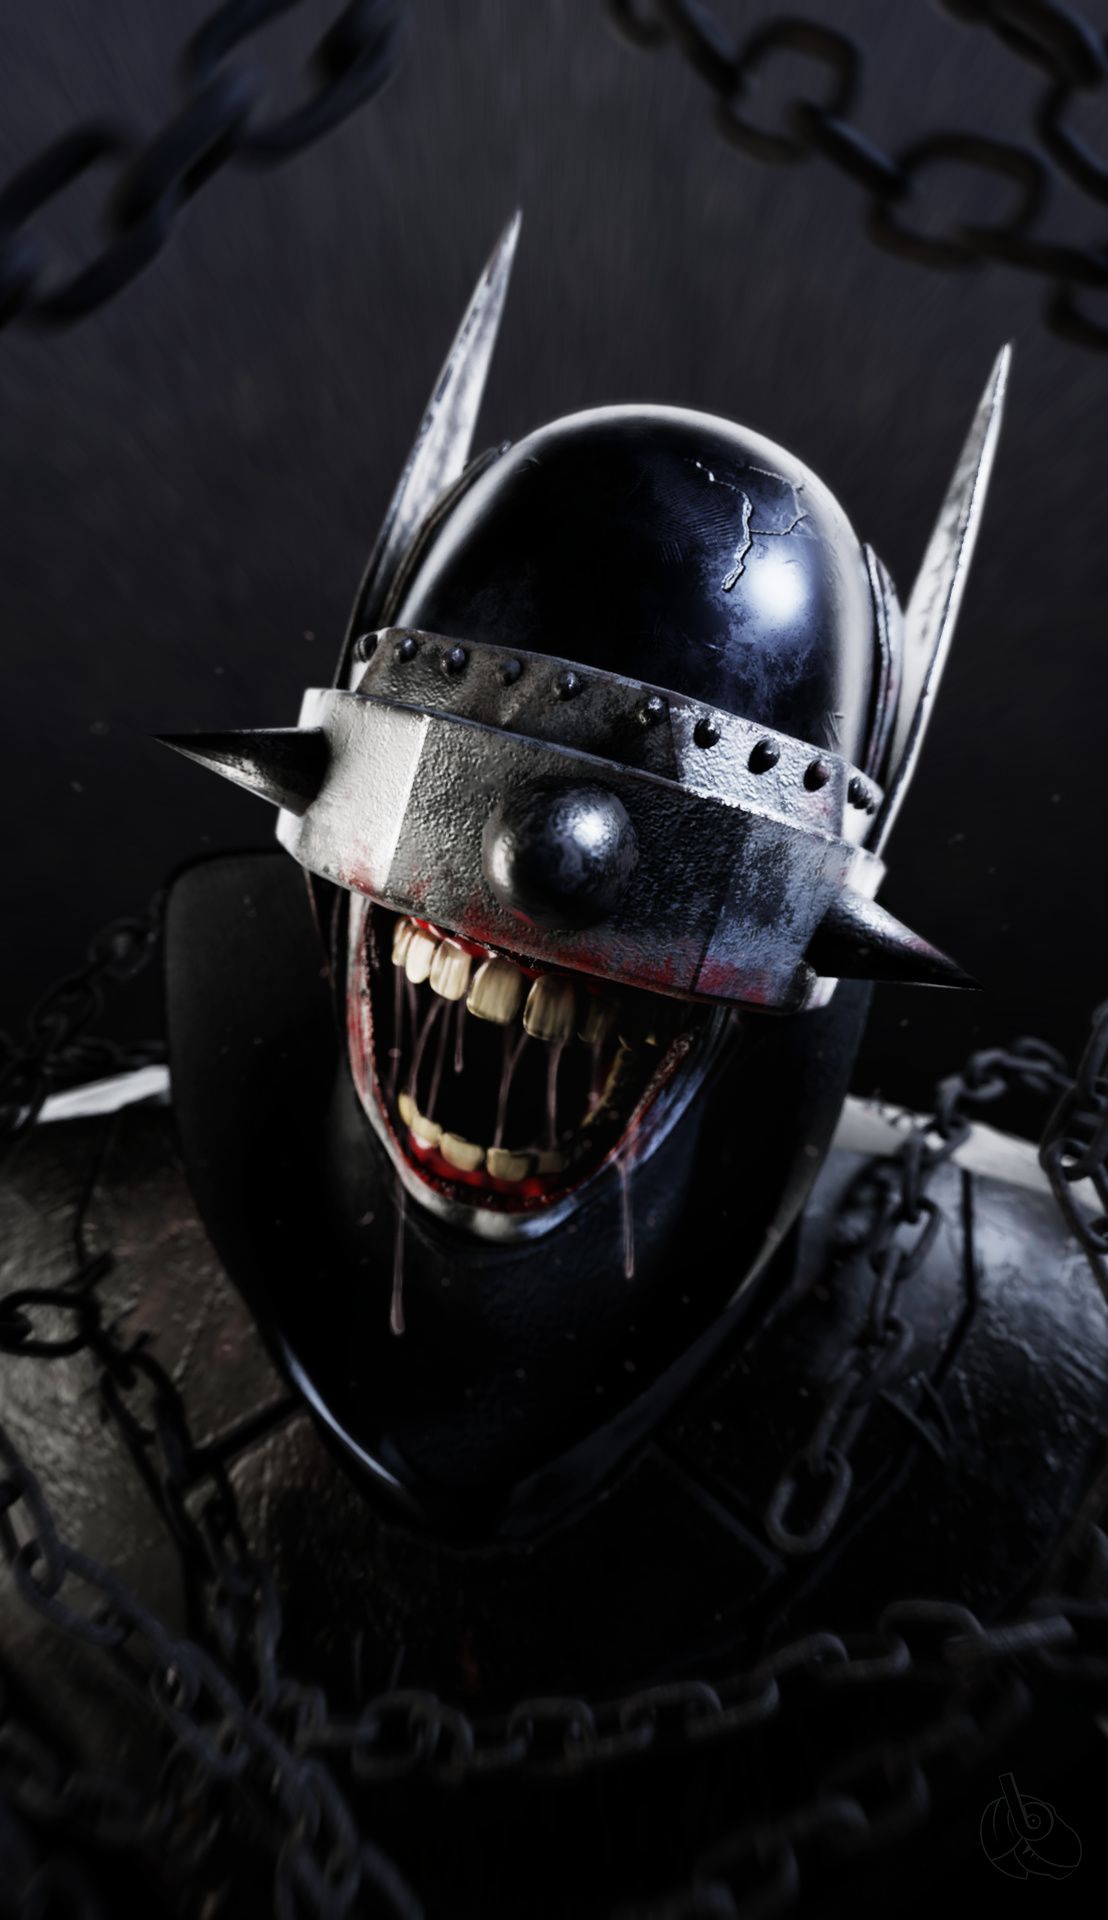 The Batman who laughs Projects Artists Community